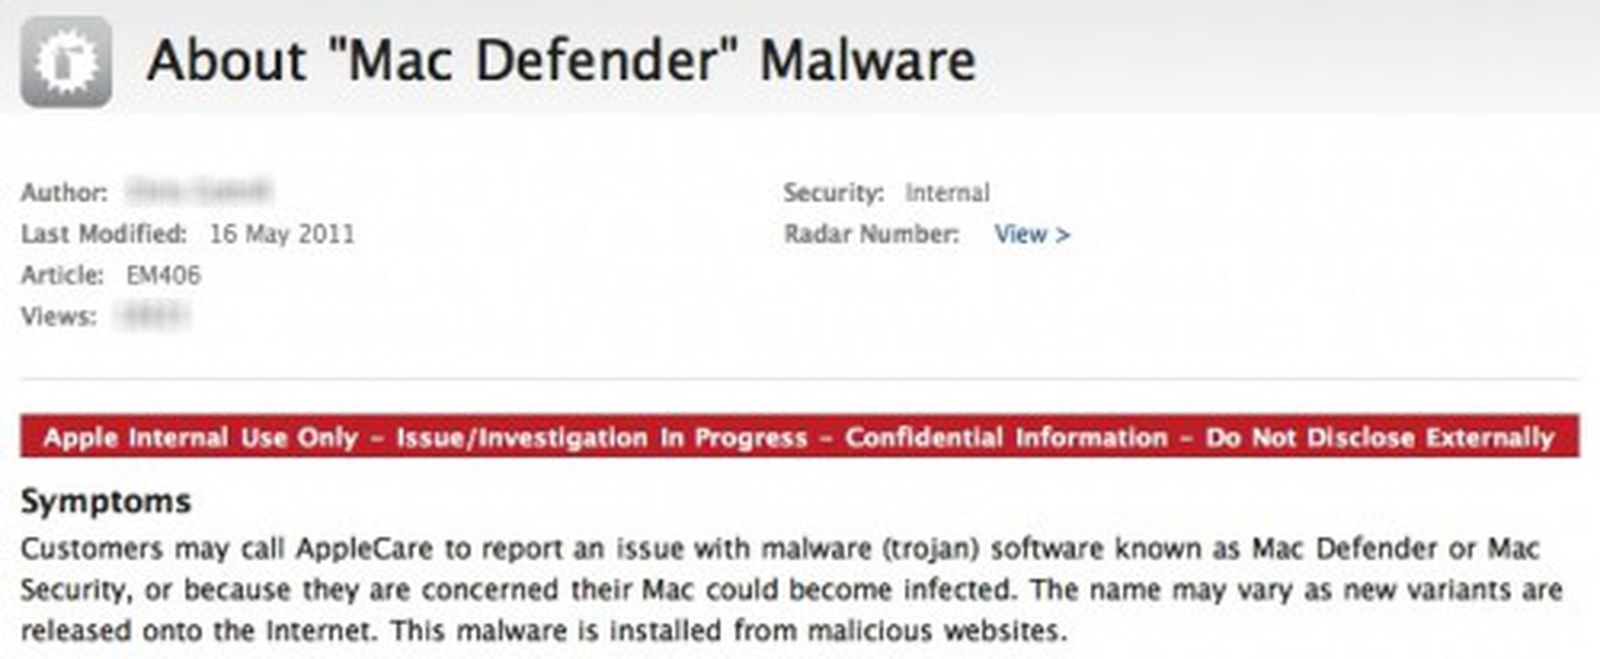 contact mac technical support malware